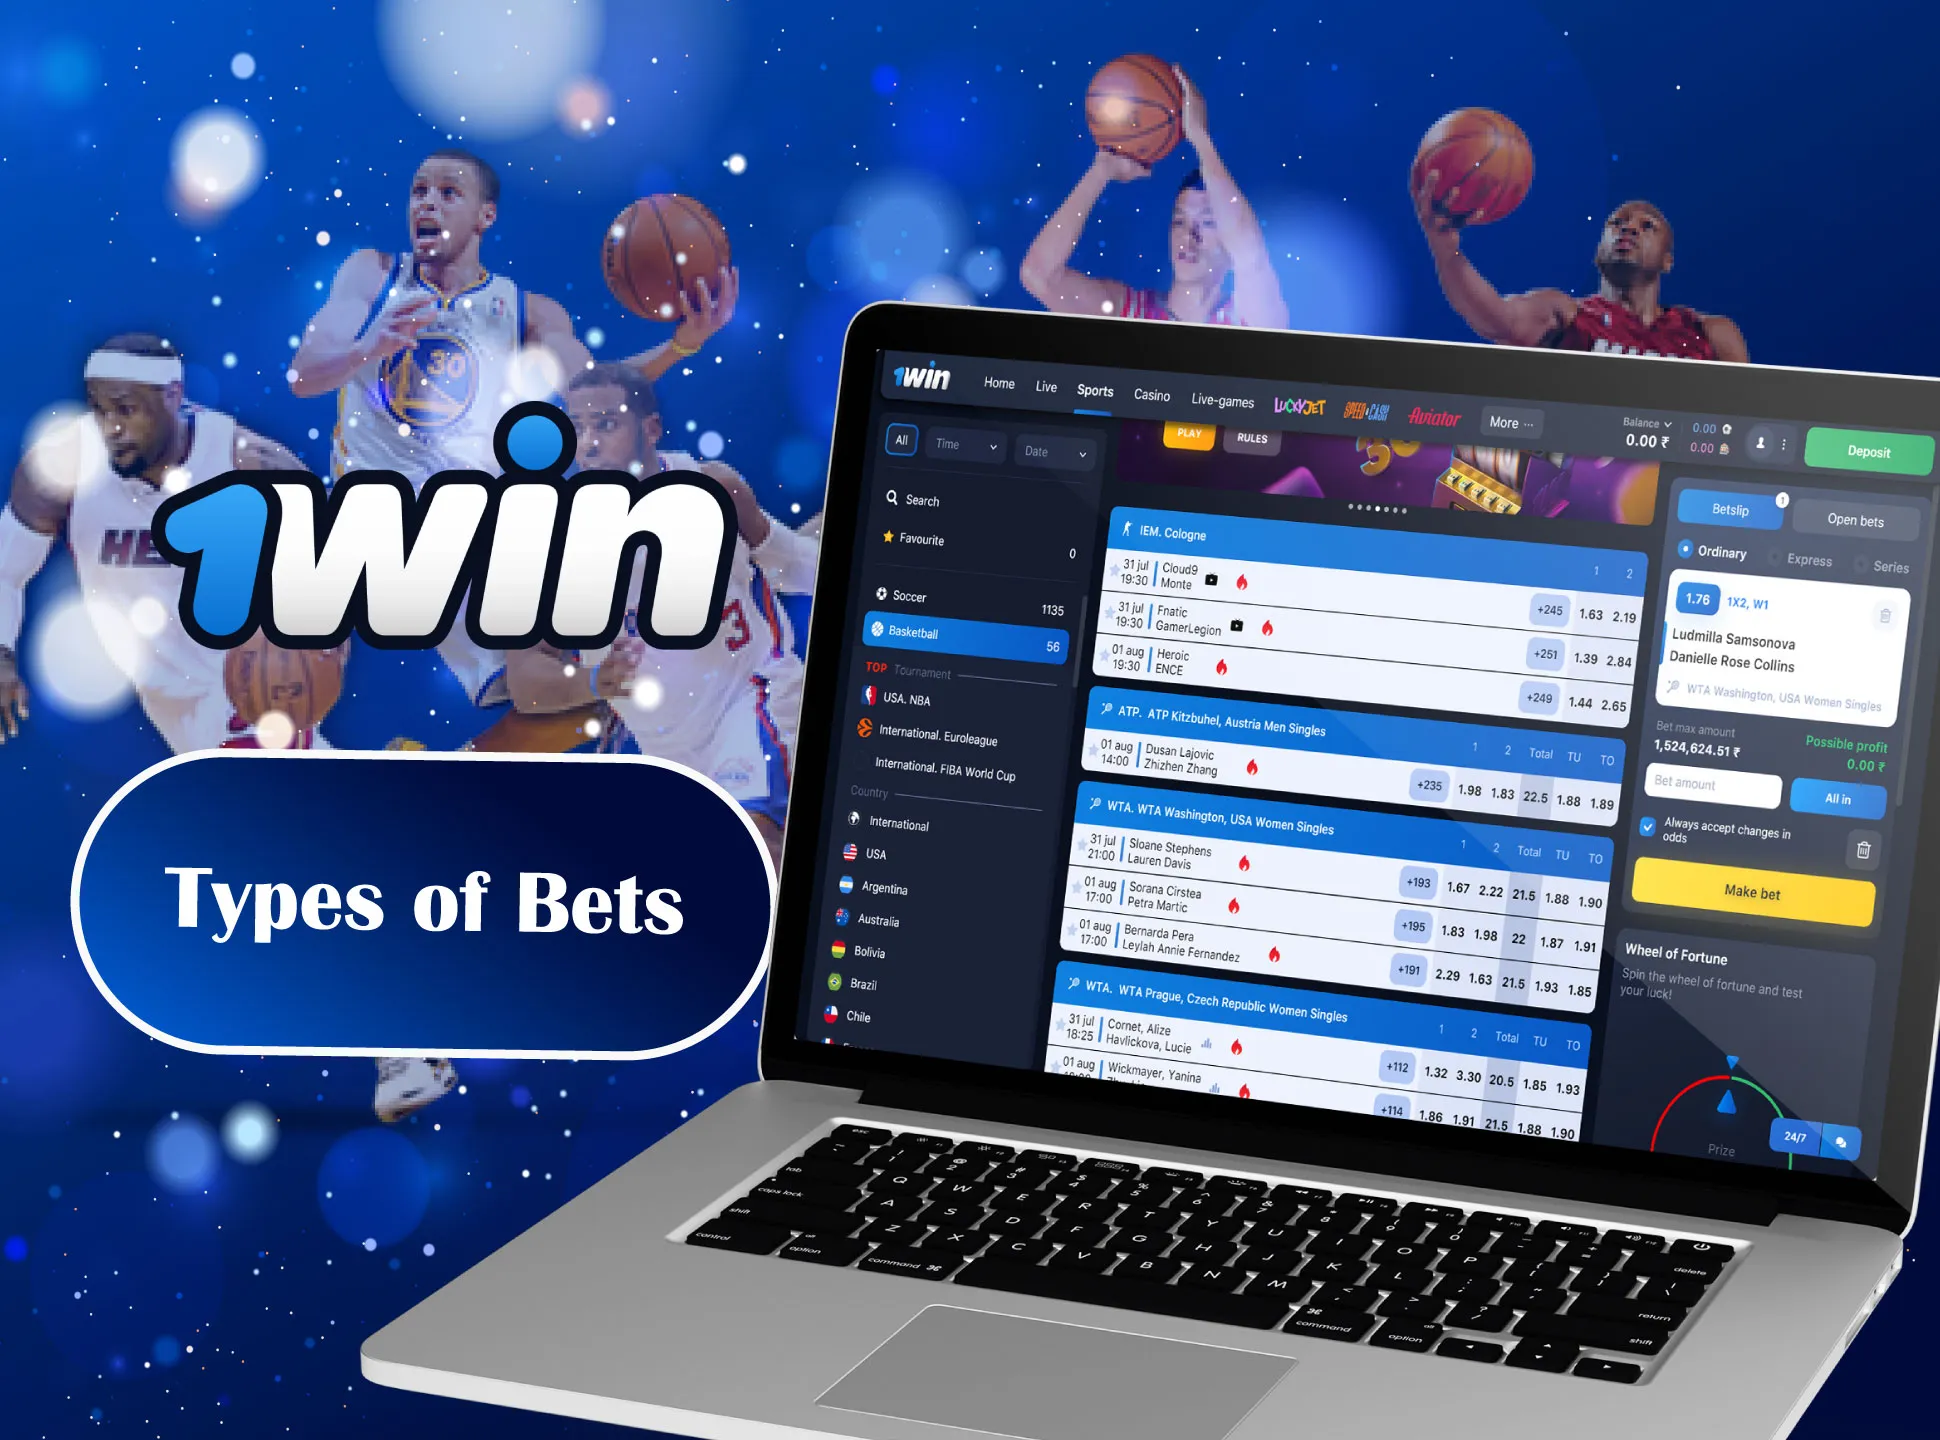 There are four types of bets on the 1win site.